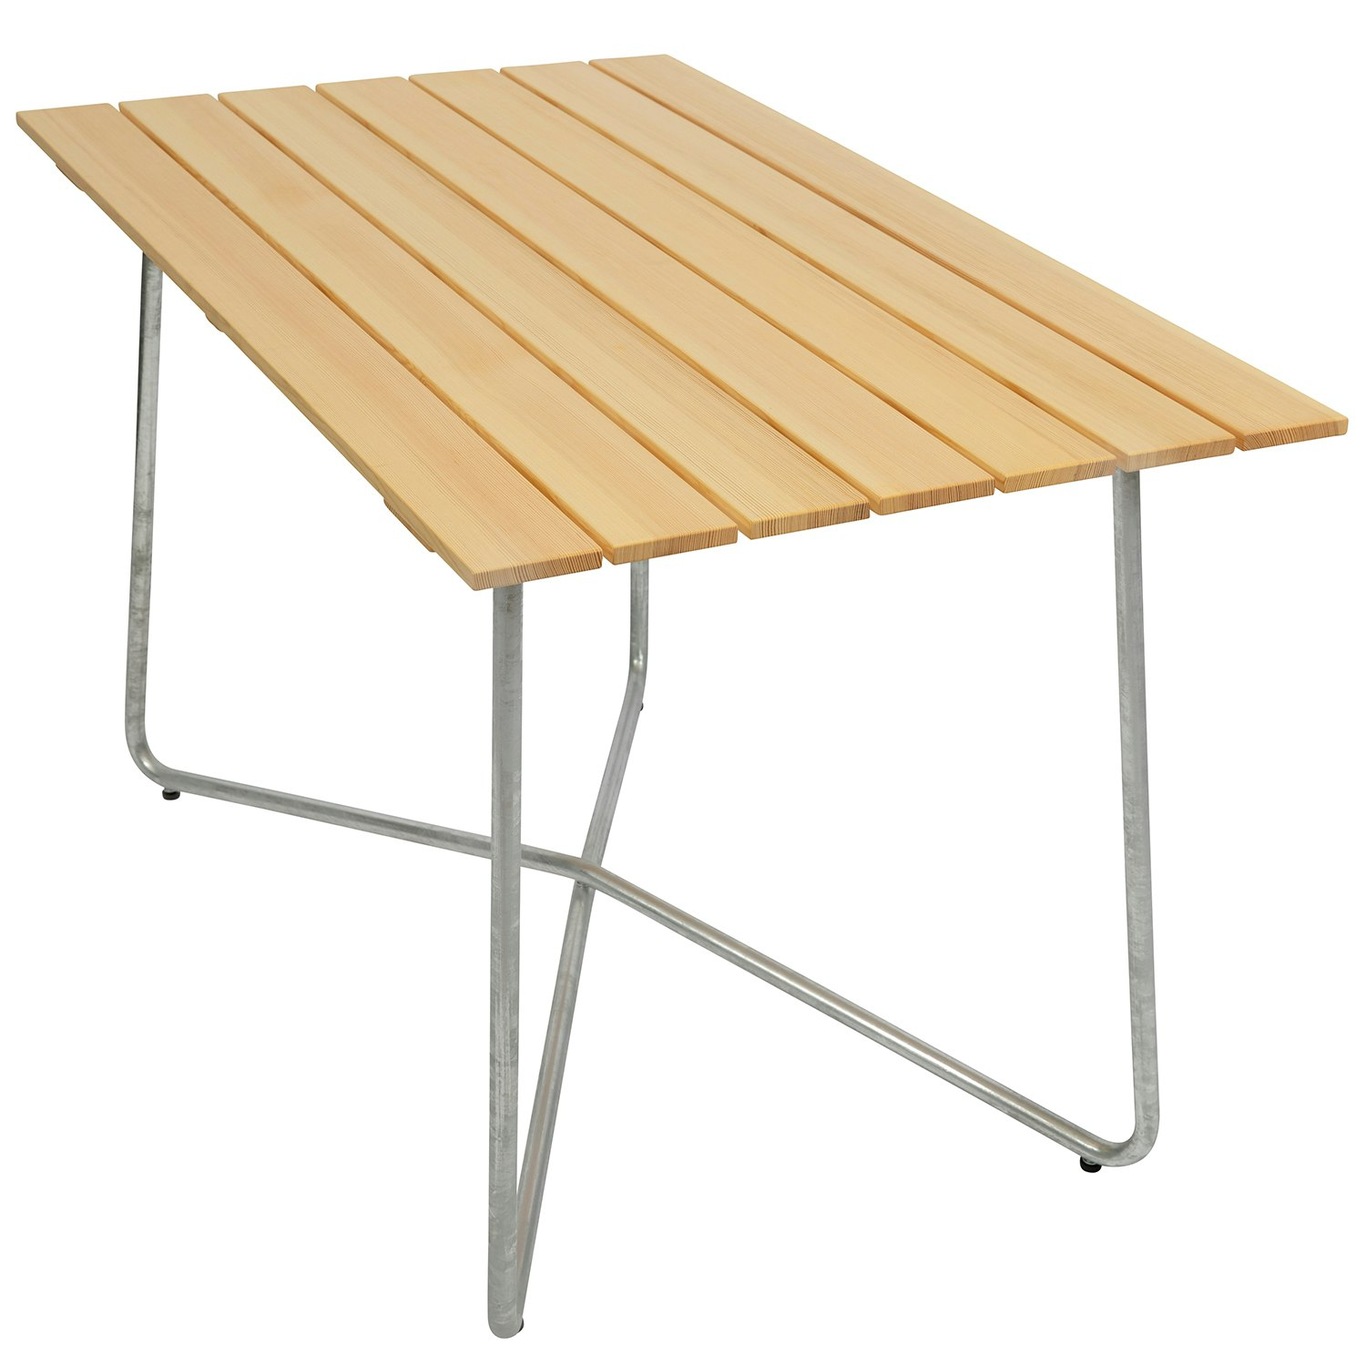 B25A Table 70x120 cm, Oiled Pine / Hot Galvanized Steel